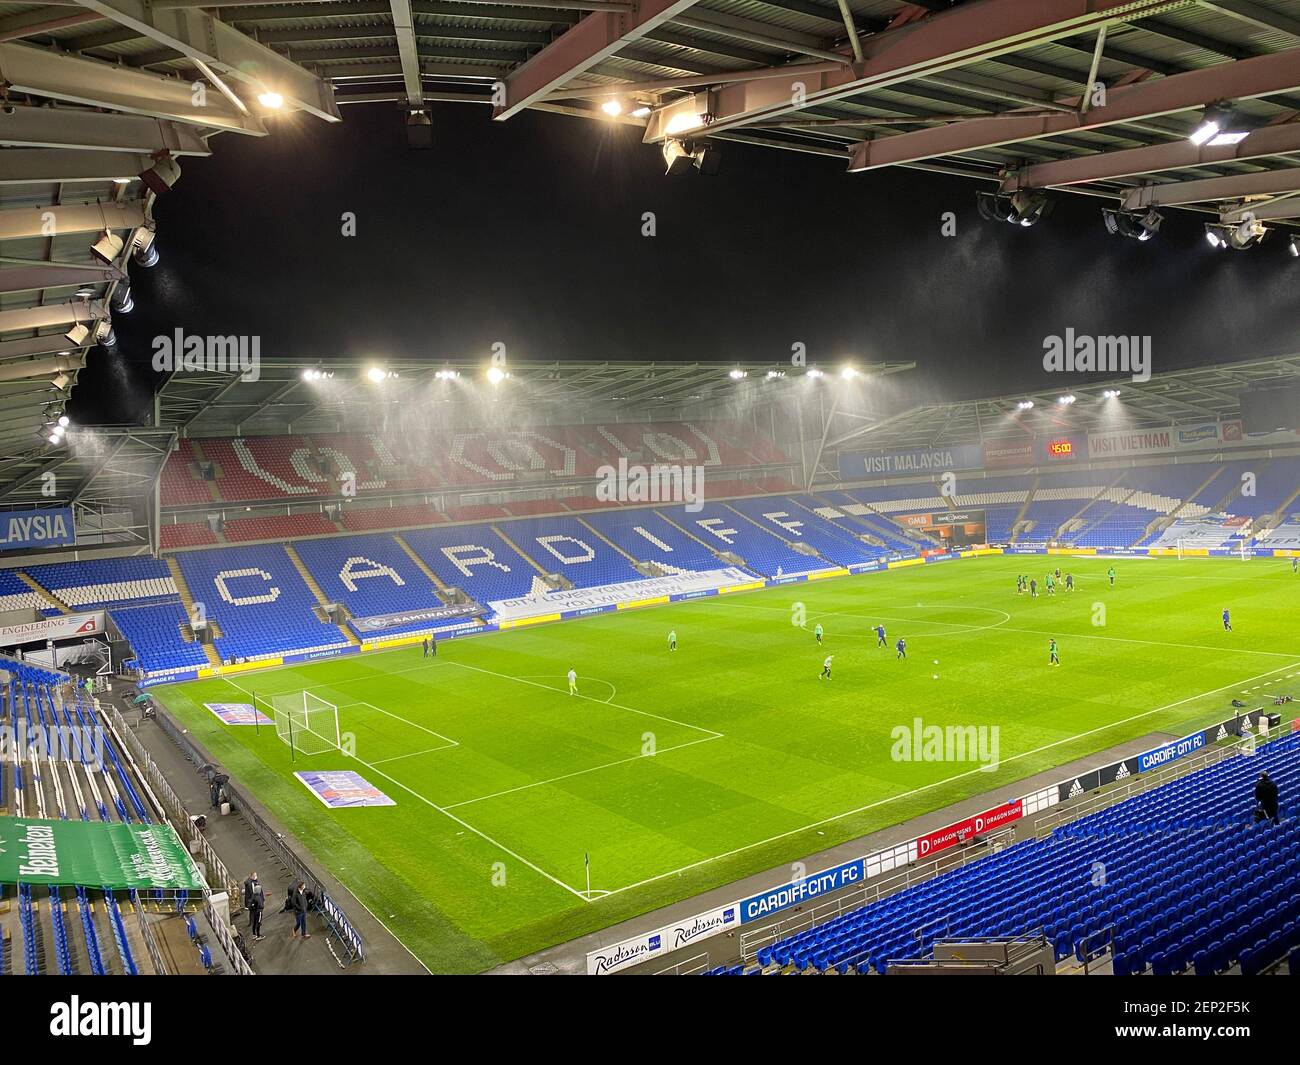 Cardiff City Stadium vs AFC Bournemouth Banque D'Images